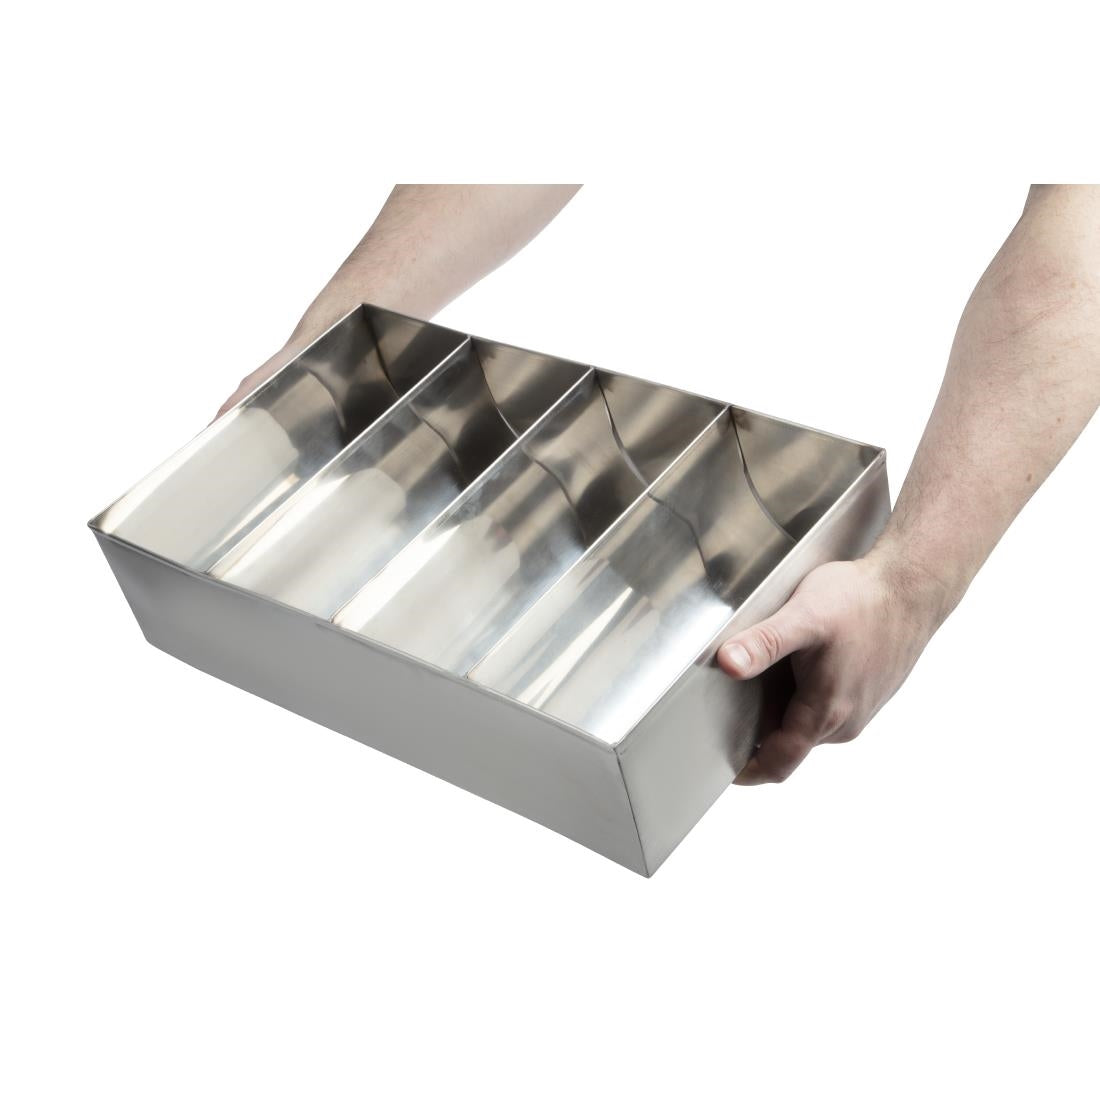 DM274 Olympia Cutlery Holder Stainless Steel JD Catering Equipment Solutions Ltd